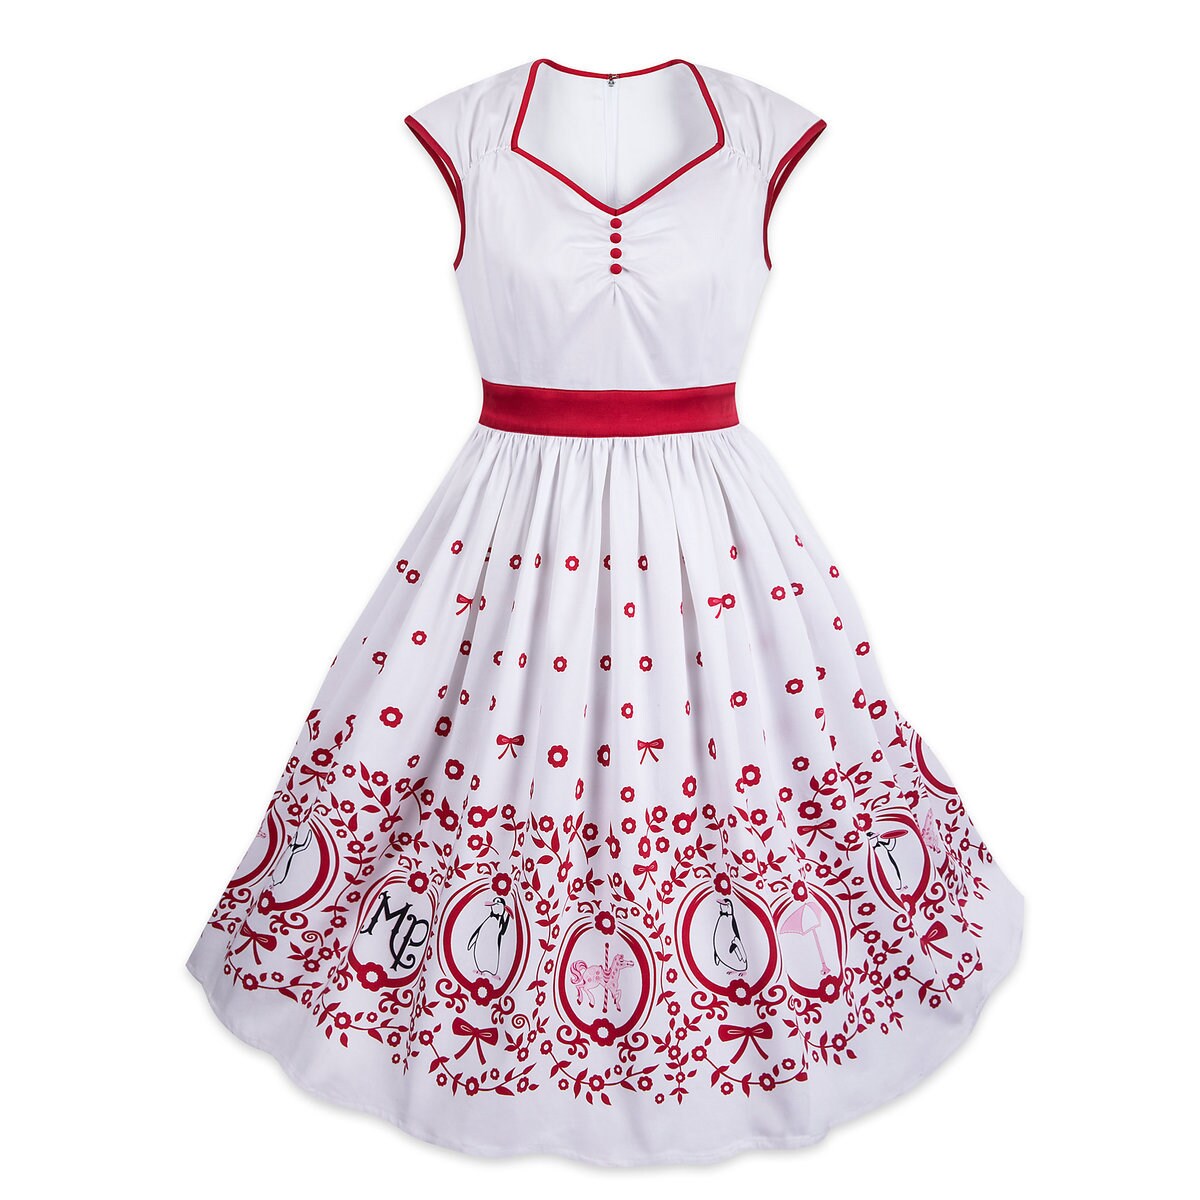 Product Image of Mary Poppins Dress for Women # 1